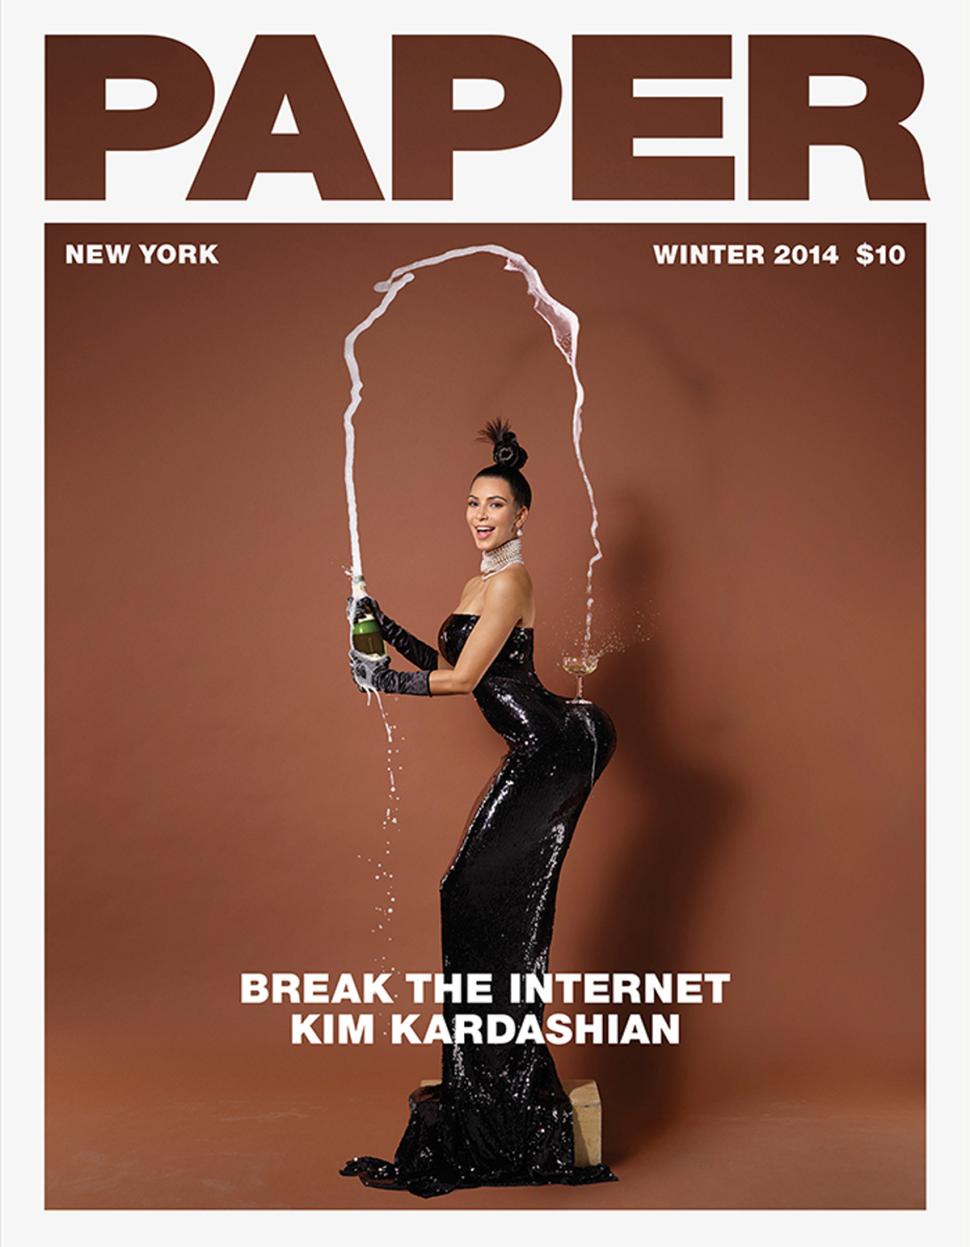 Kim Kardashian balanced a champagne glass on her behind for Paper magazine in a picture by Jean-Paul Goude.